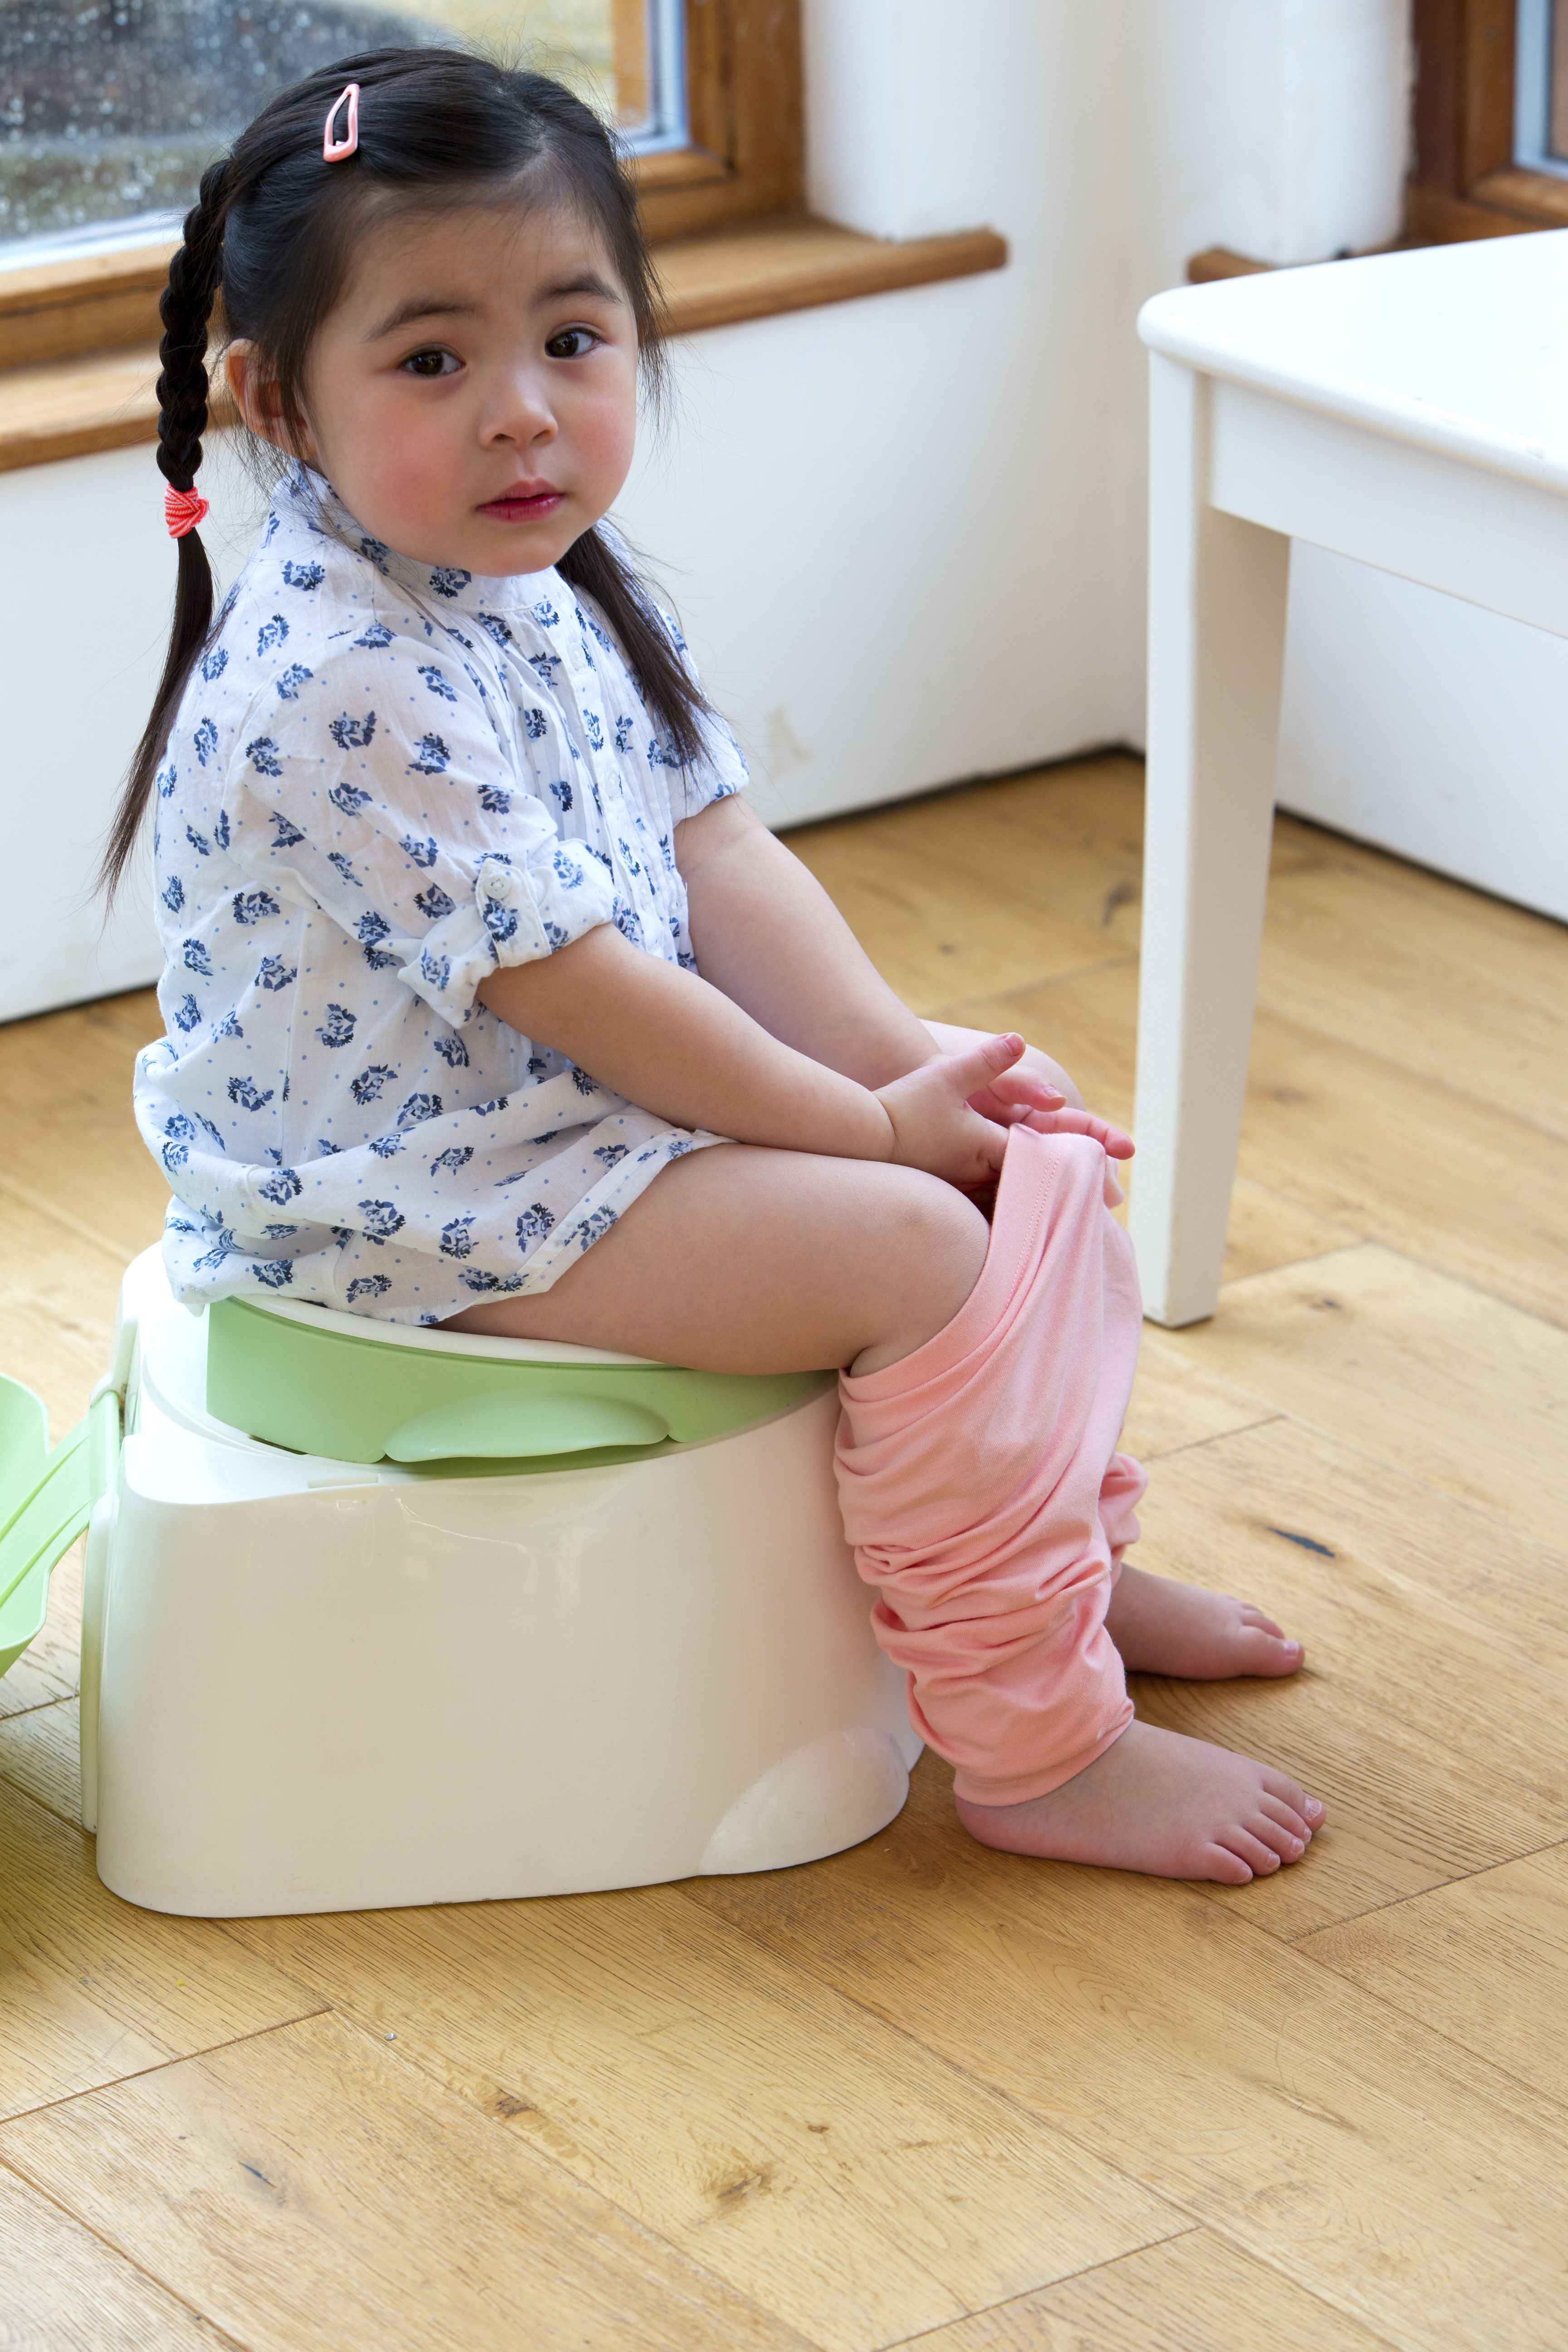 18 to 36 months has a toddler girl sitting on a small toilet